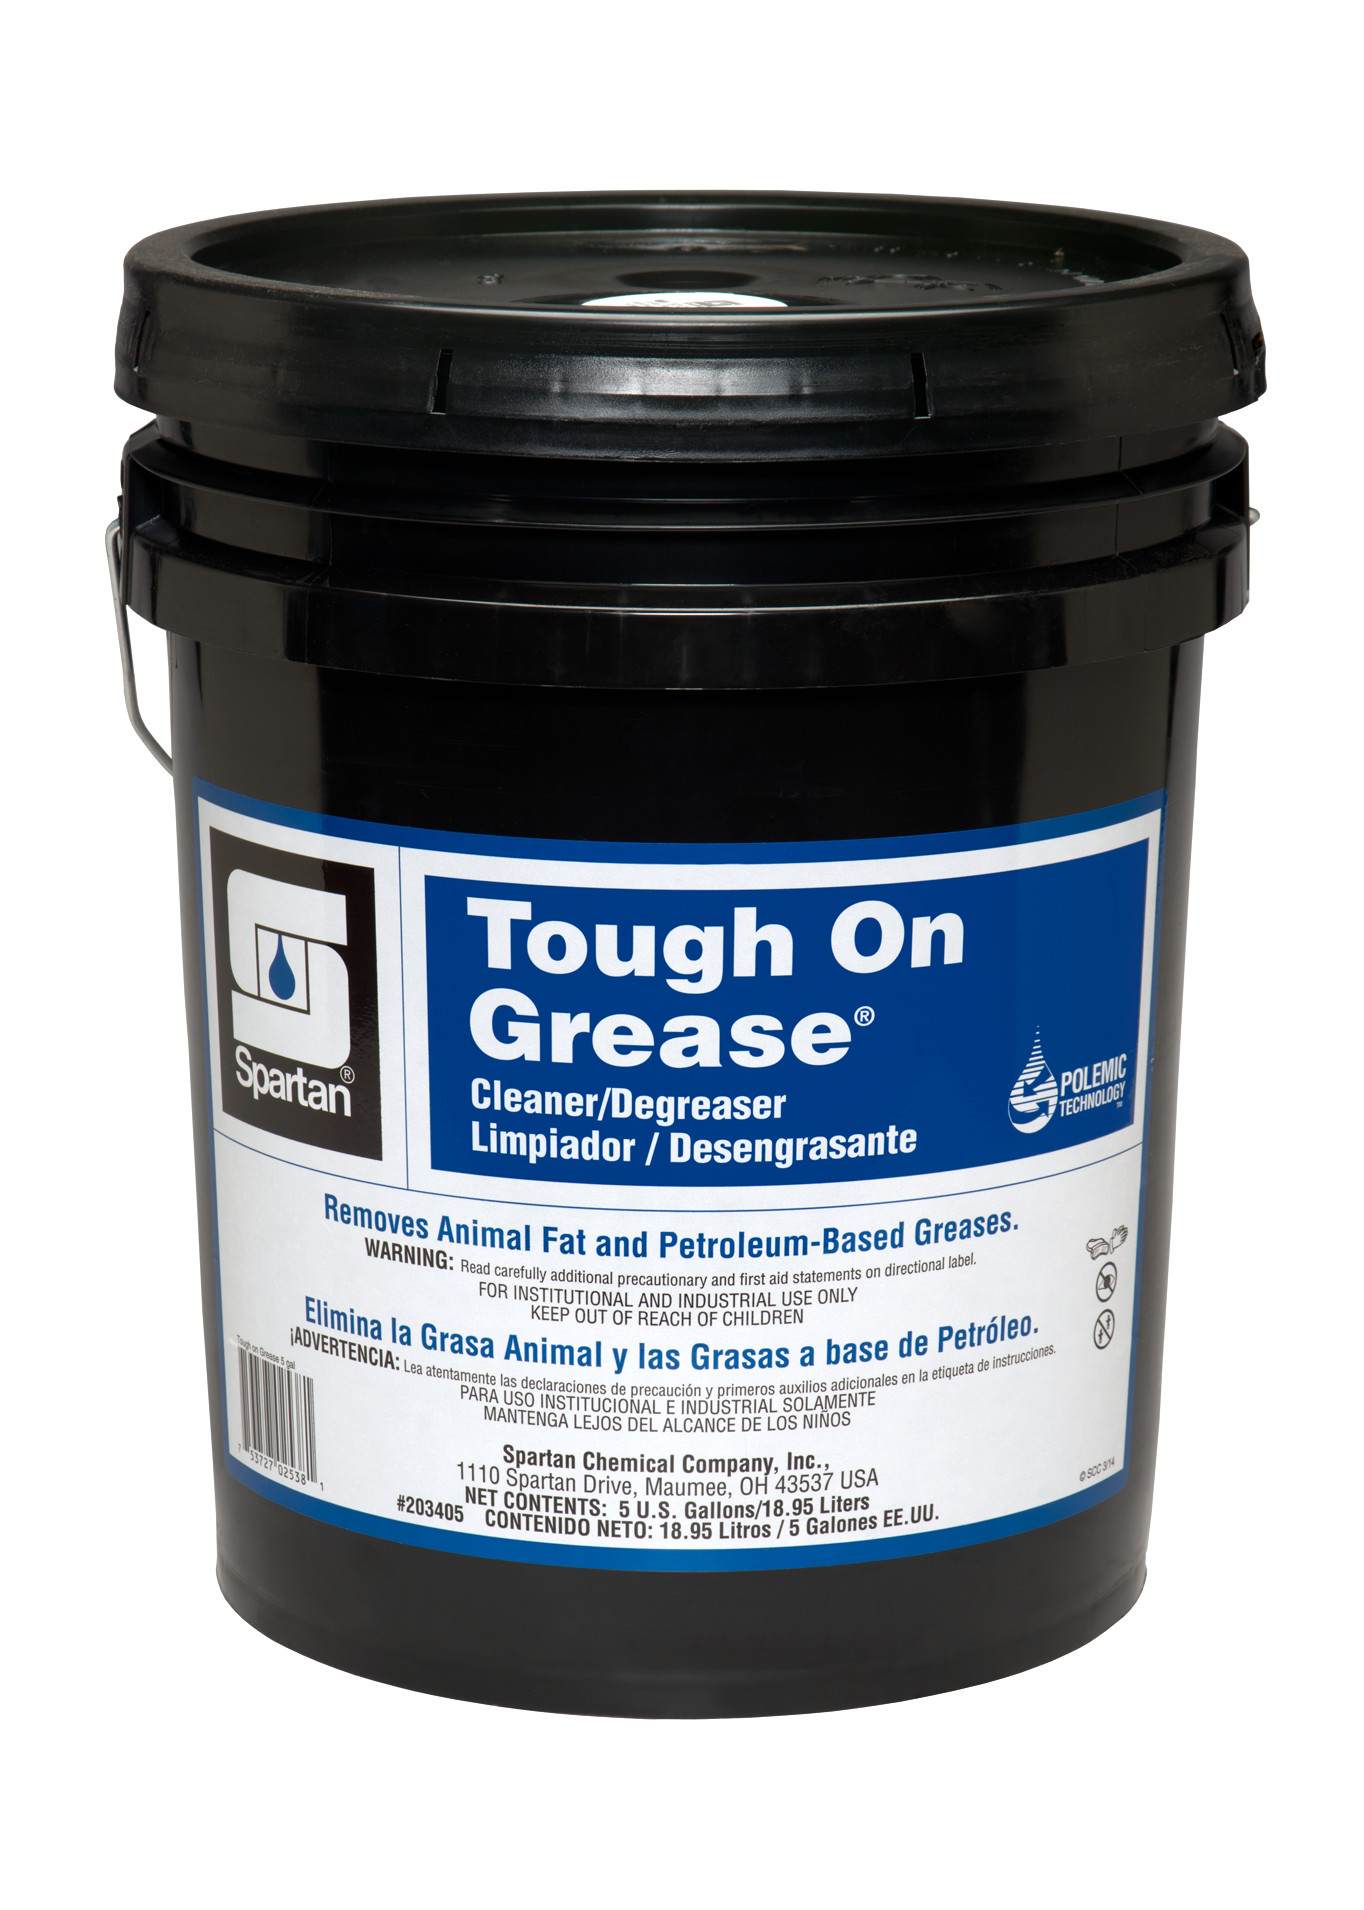 Spartan Chemical Company Tough on Grease, 5 GAL PAIL